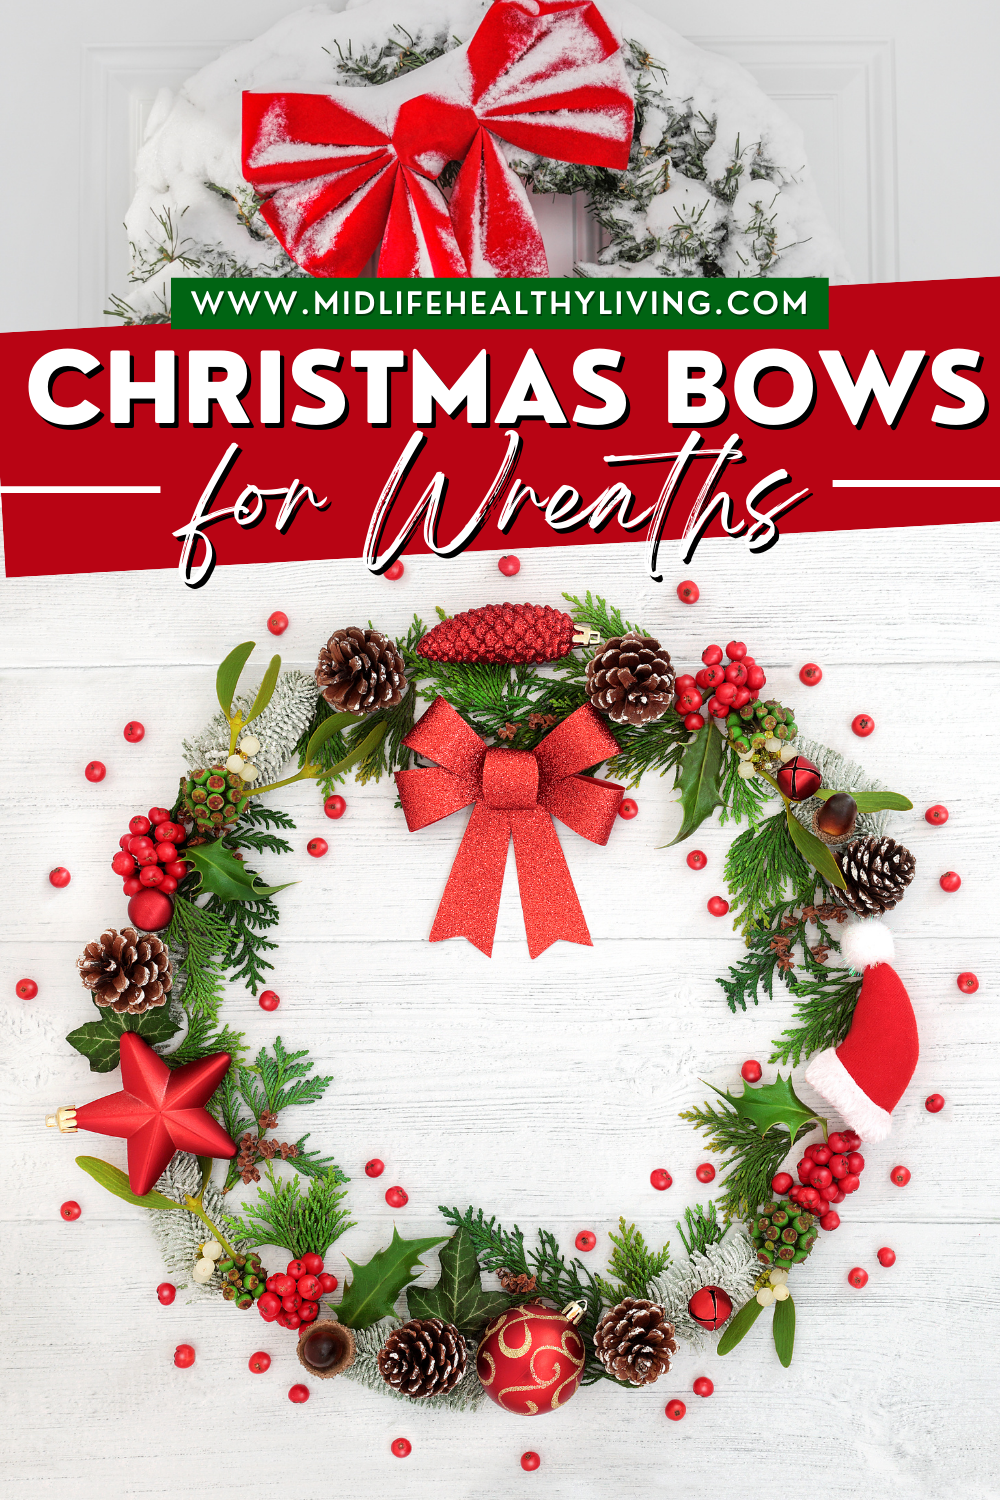 Pin showing the title Christmas Bows for Wreaths